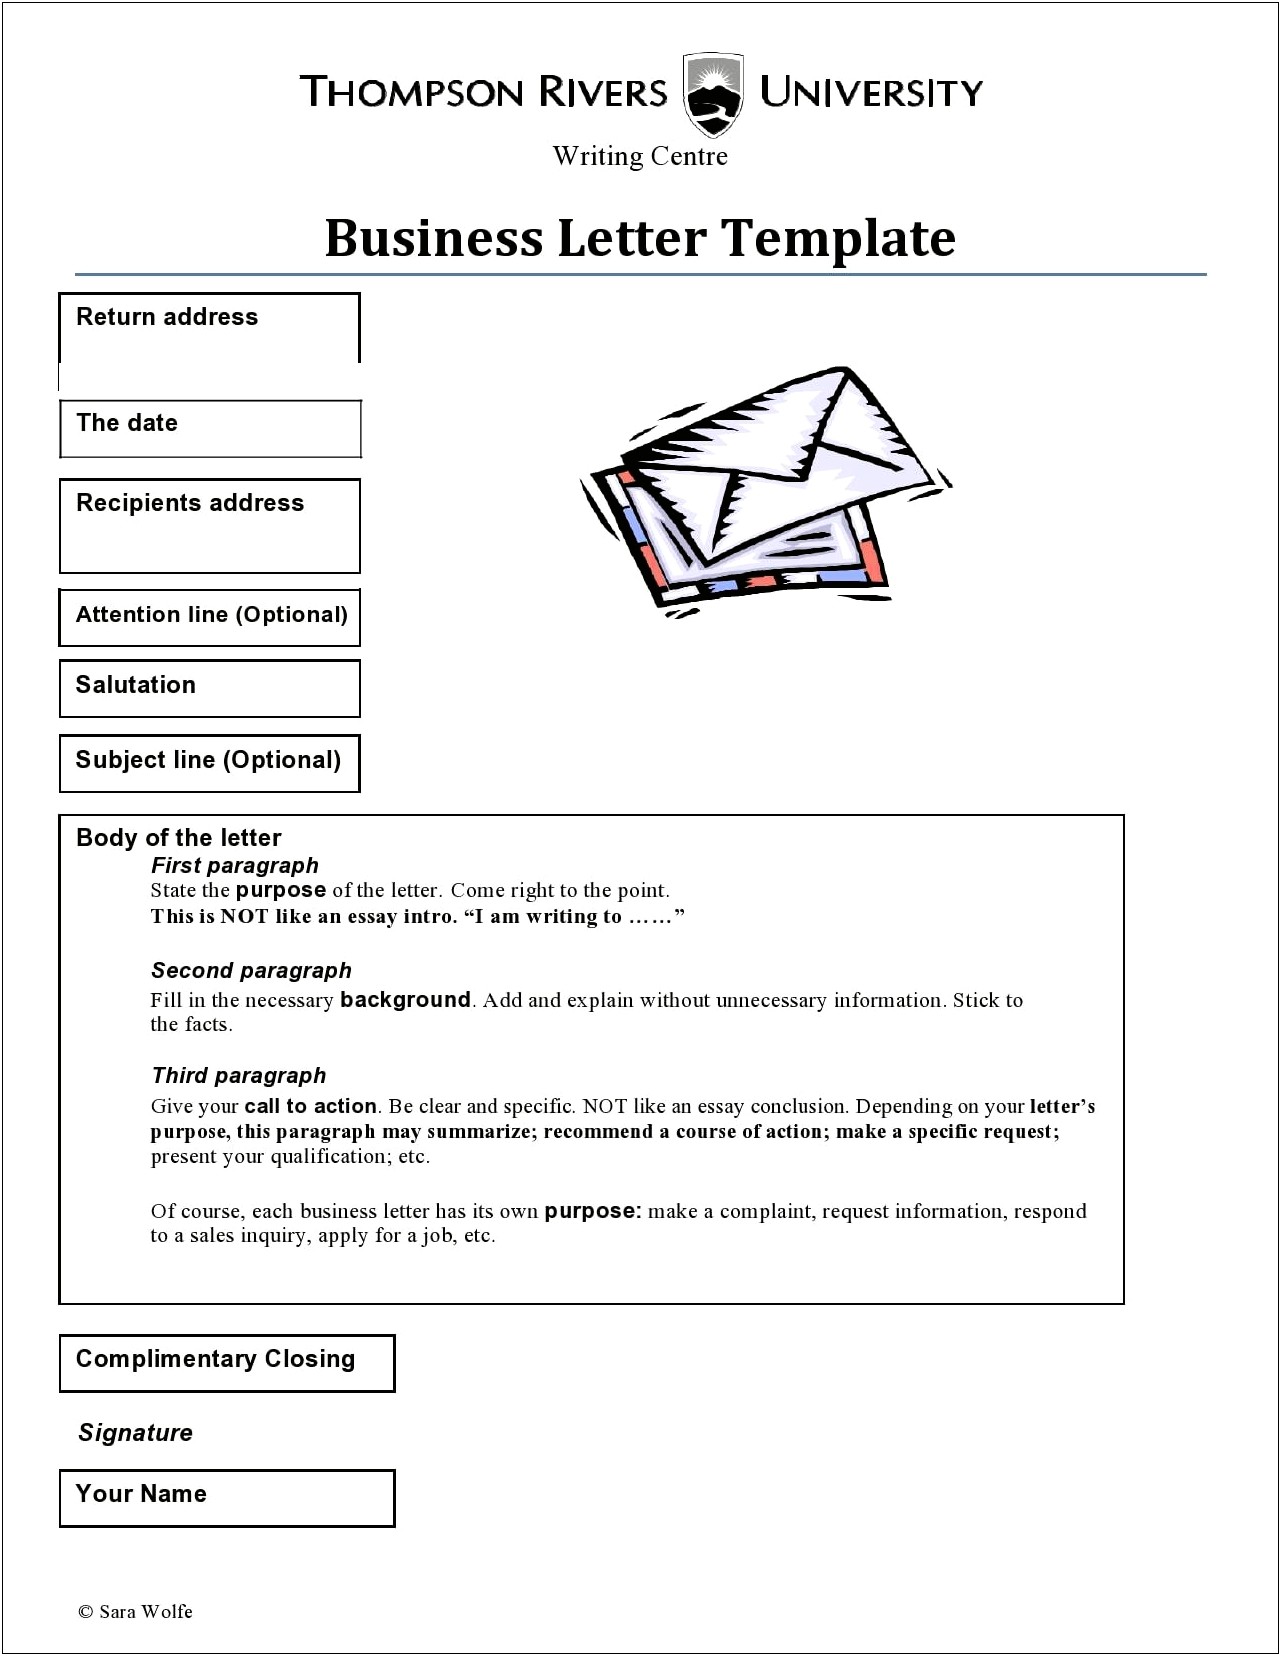 Business Letter Template With Attention Line Title